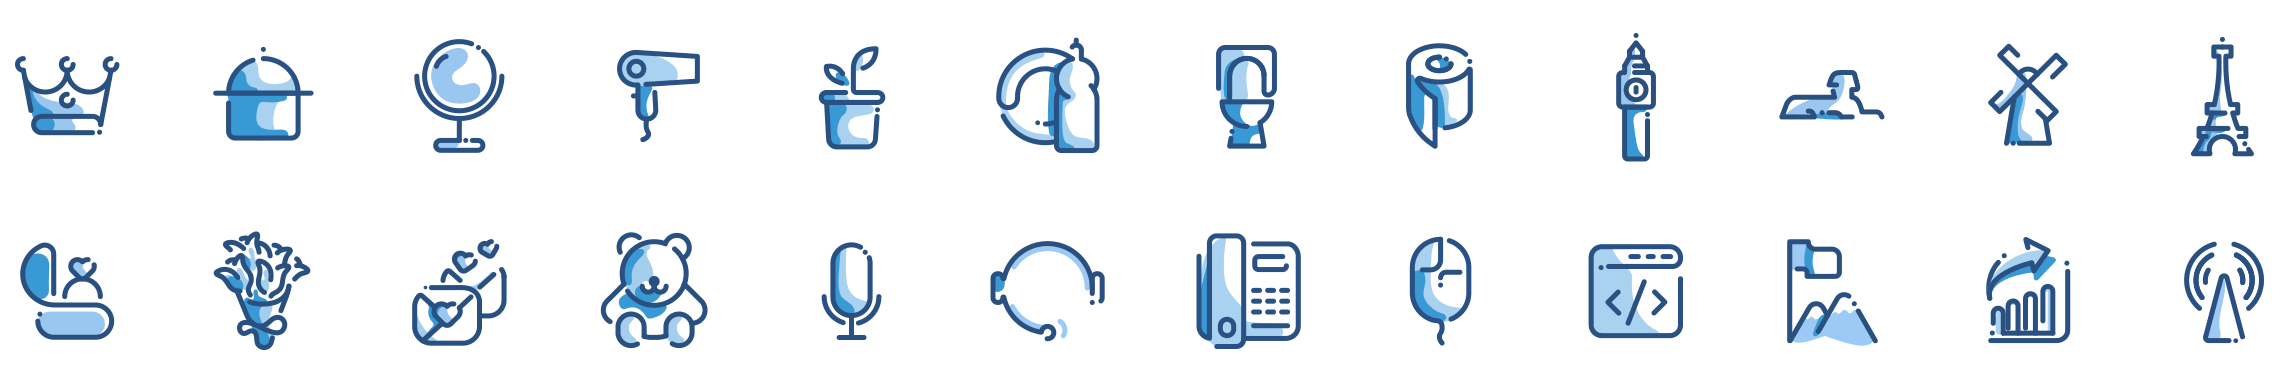 duo-tone-icons-pack